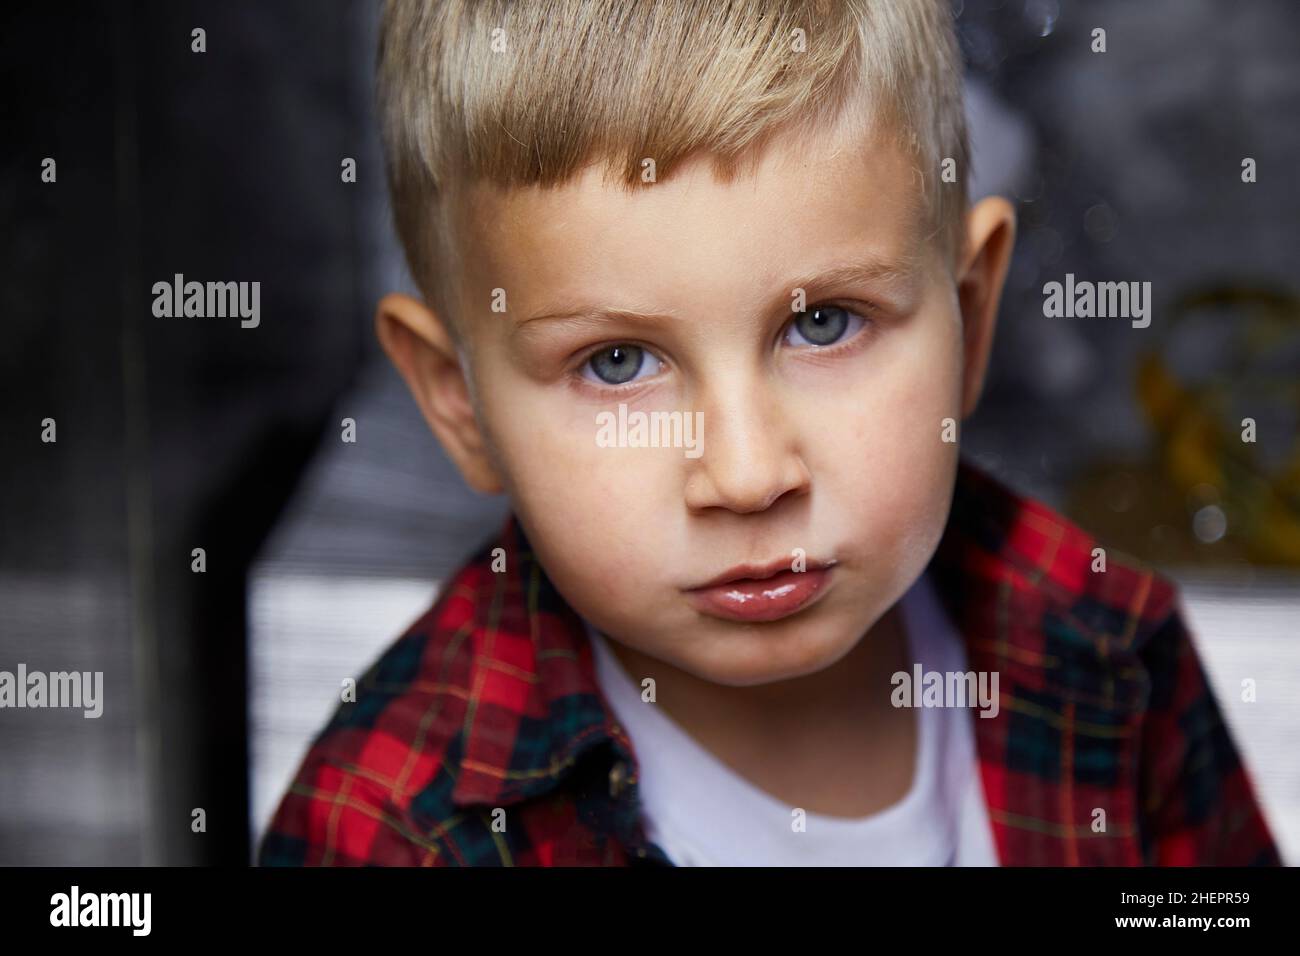 Portrait of handsome serious adorable kid close up. Atmospheric, aesthetic home for New Year's Eve. Silver cozy home, good mood. Stock Photo